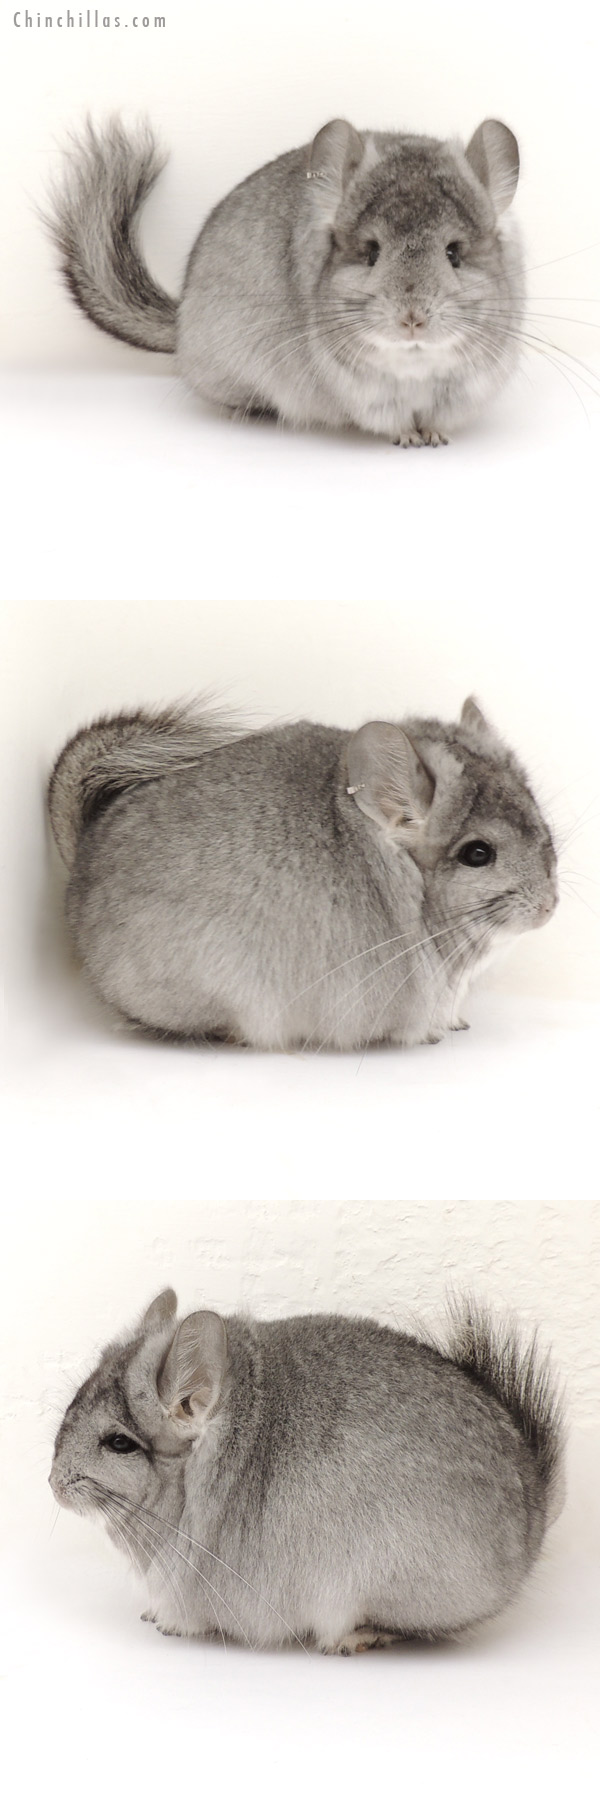 Chinchilla or related item offered for sale or export on Chinchillas.com - 13247 Standard Royal Persian Angora Female Chinchilla